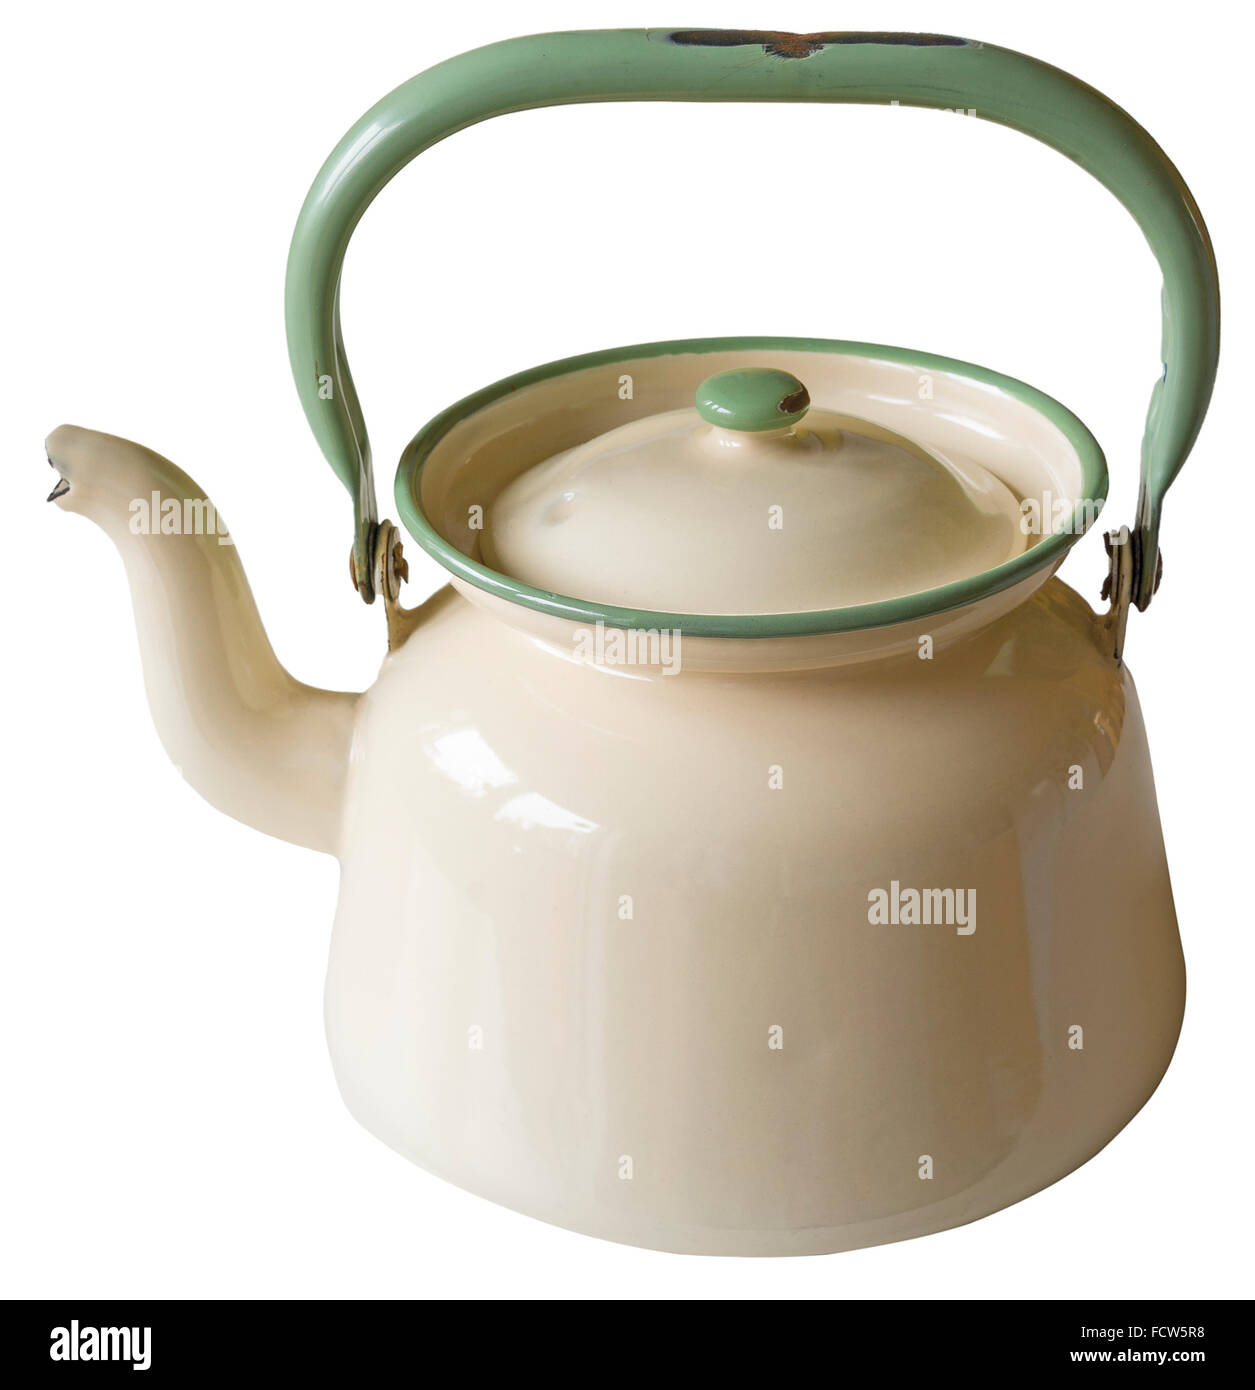 https://c8.alamy.com/comp/FCW5R8/vintage-metal-enamalled-yellow-and-green-coffee-or-teapot-kettle-model-FCW5R8.jpg